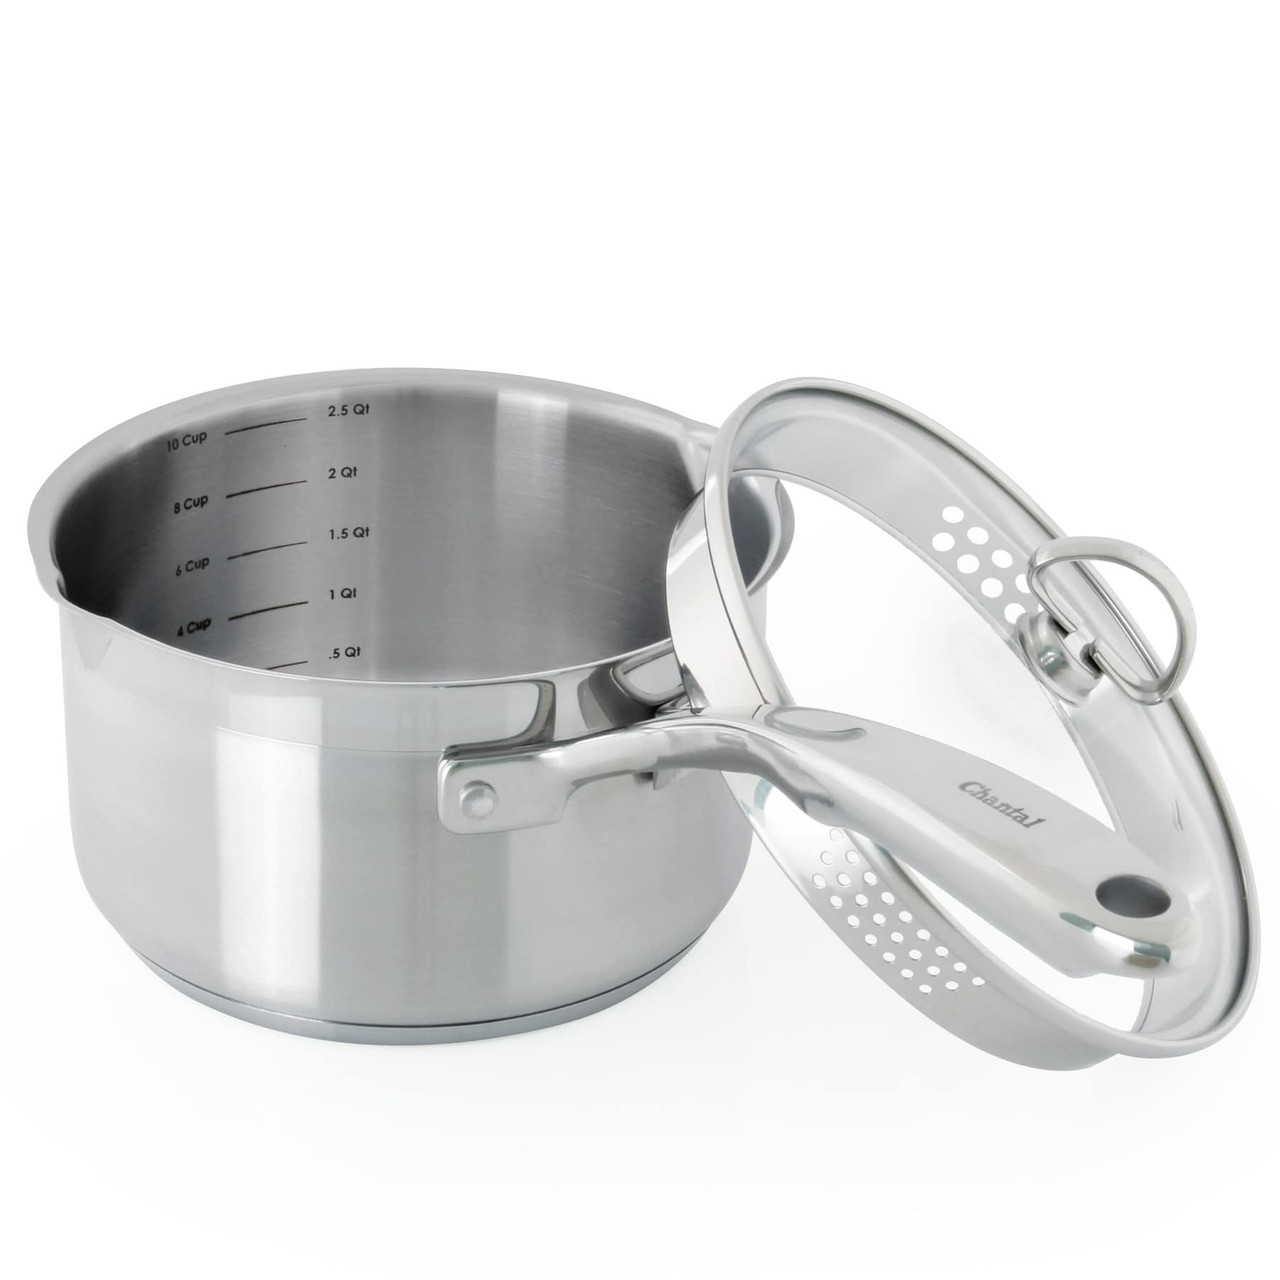 Induction 21 Steel Ceramic Coated Saucepan with Lid (1 Qt.)